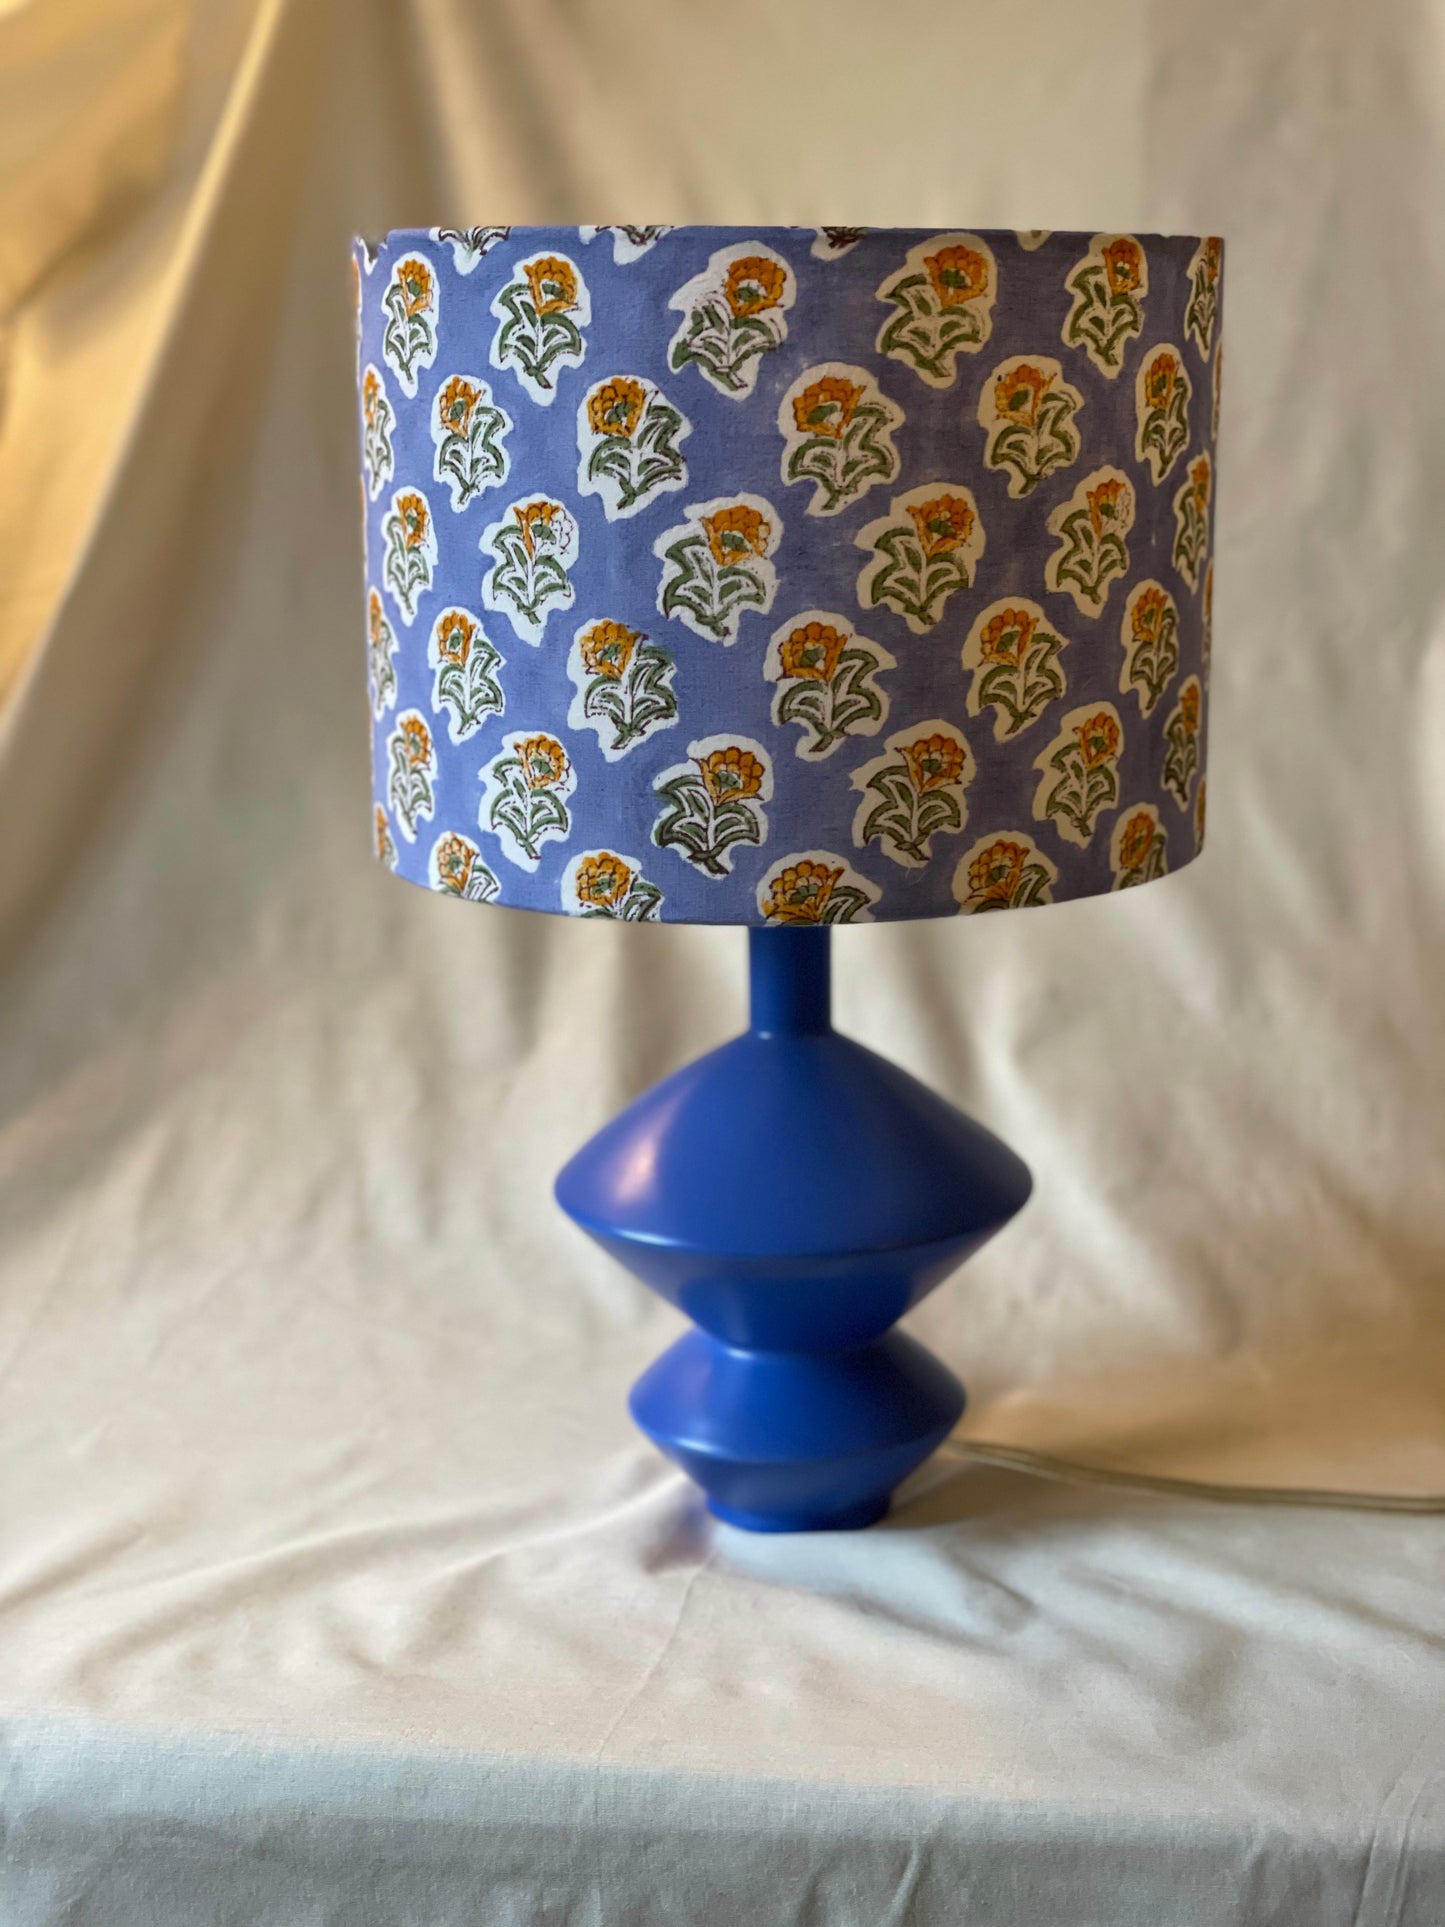 10 inch Drum Lampshade. Indian Block Print- Blue with Yellow Floral Motif.